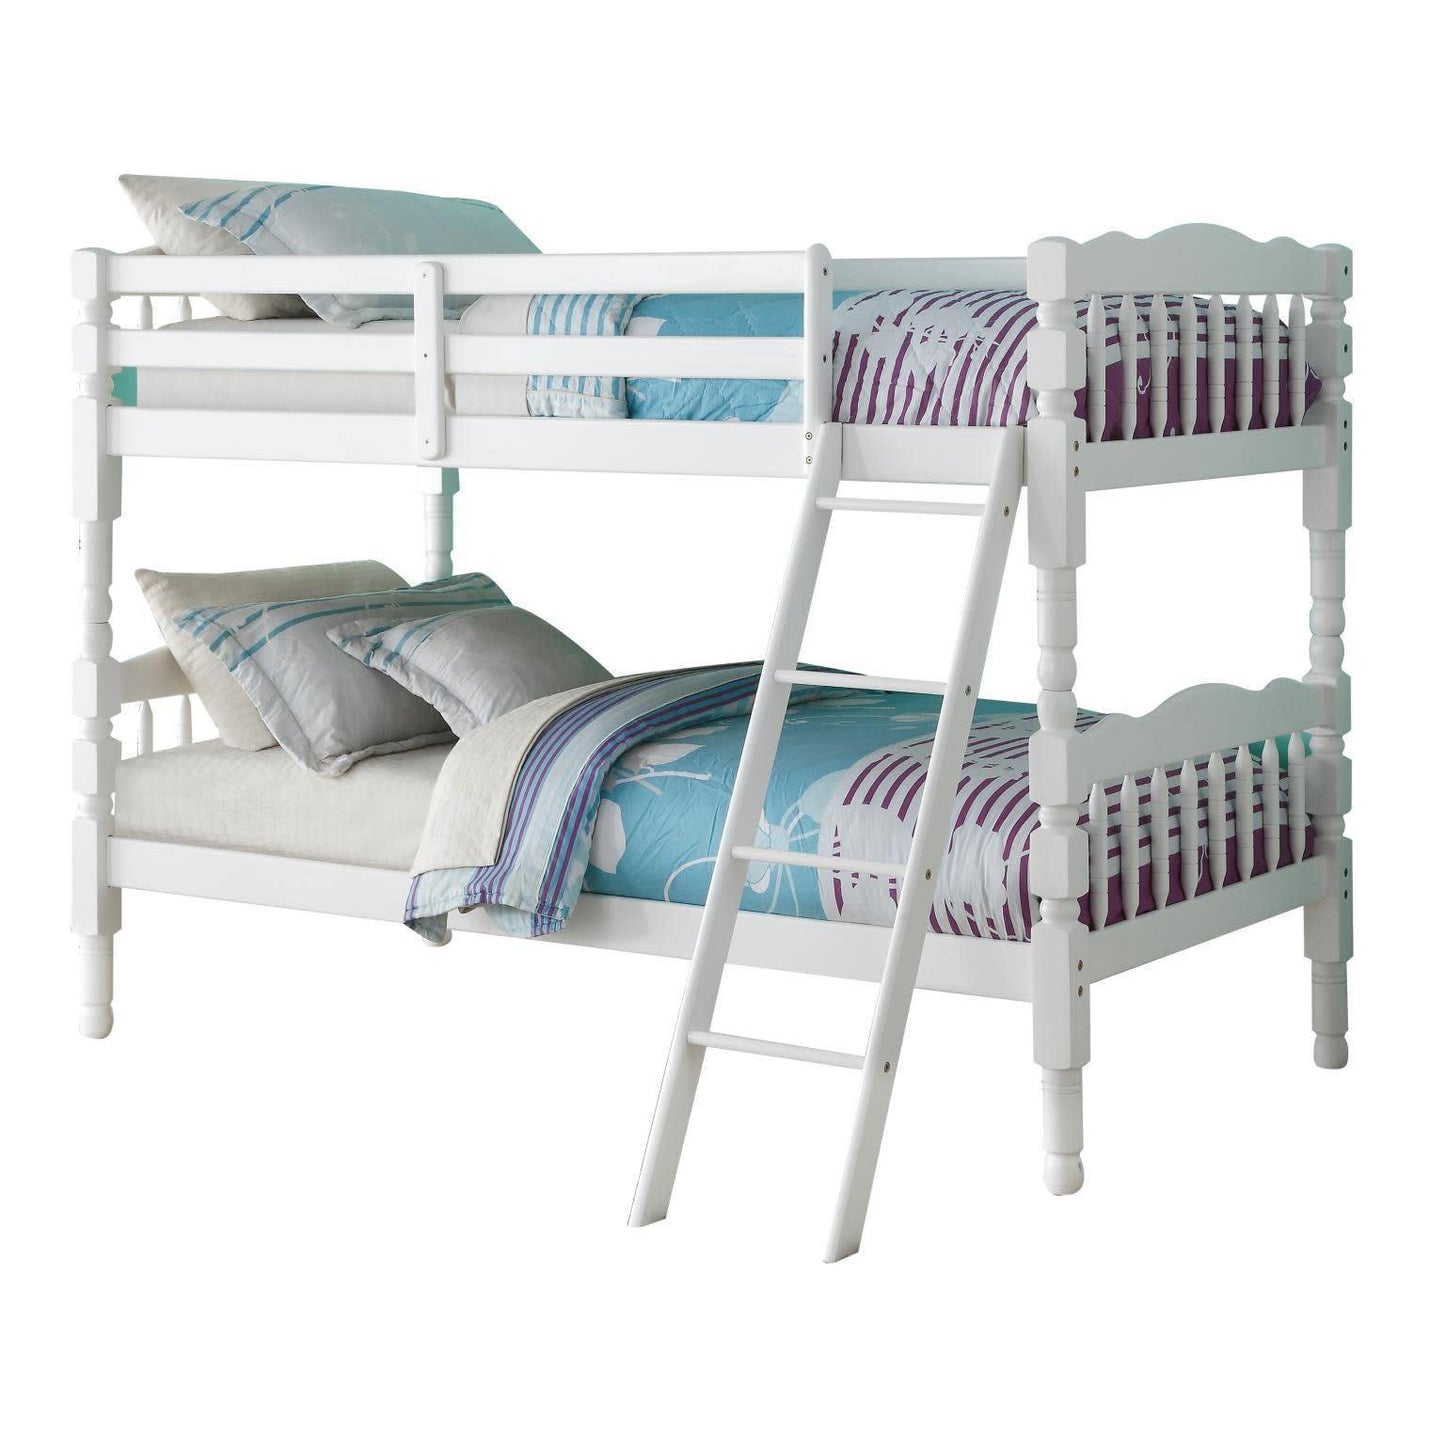 Homestead Bunk Bed Twin Twin White - Adjustable Wooden Twin Beds